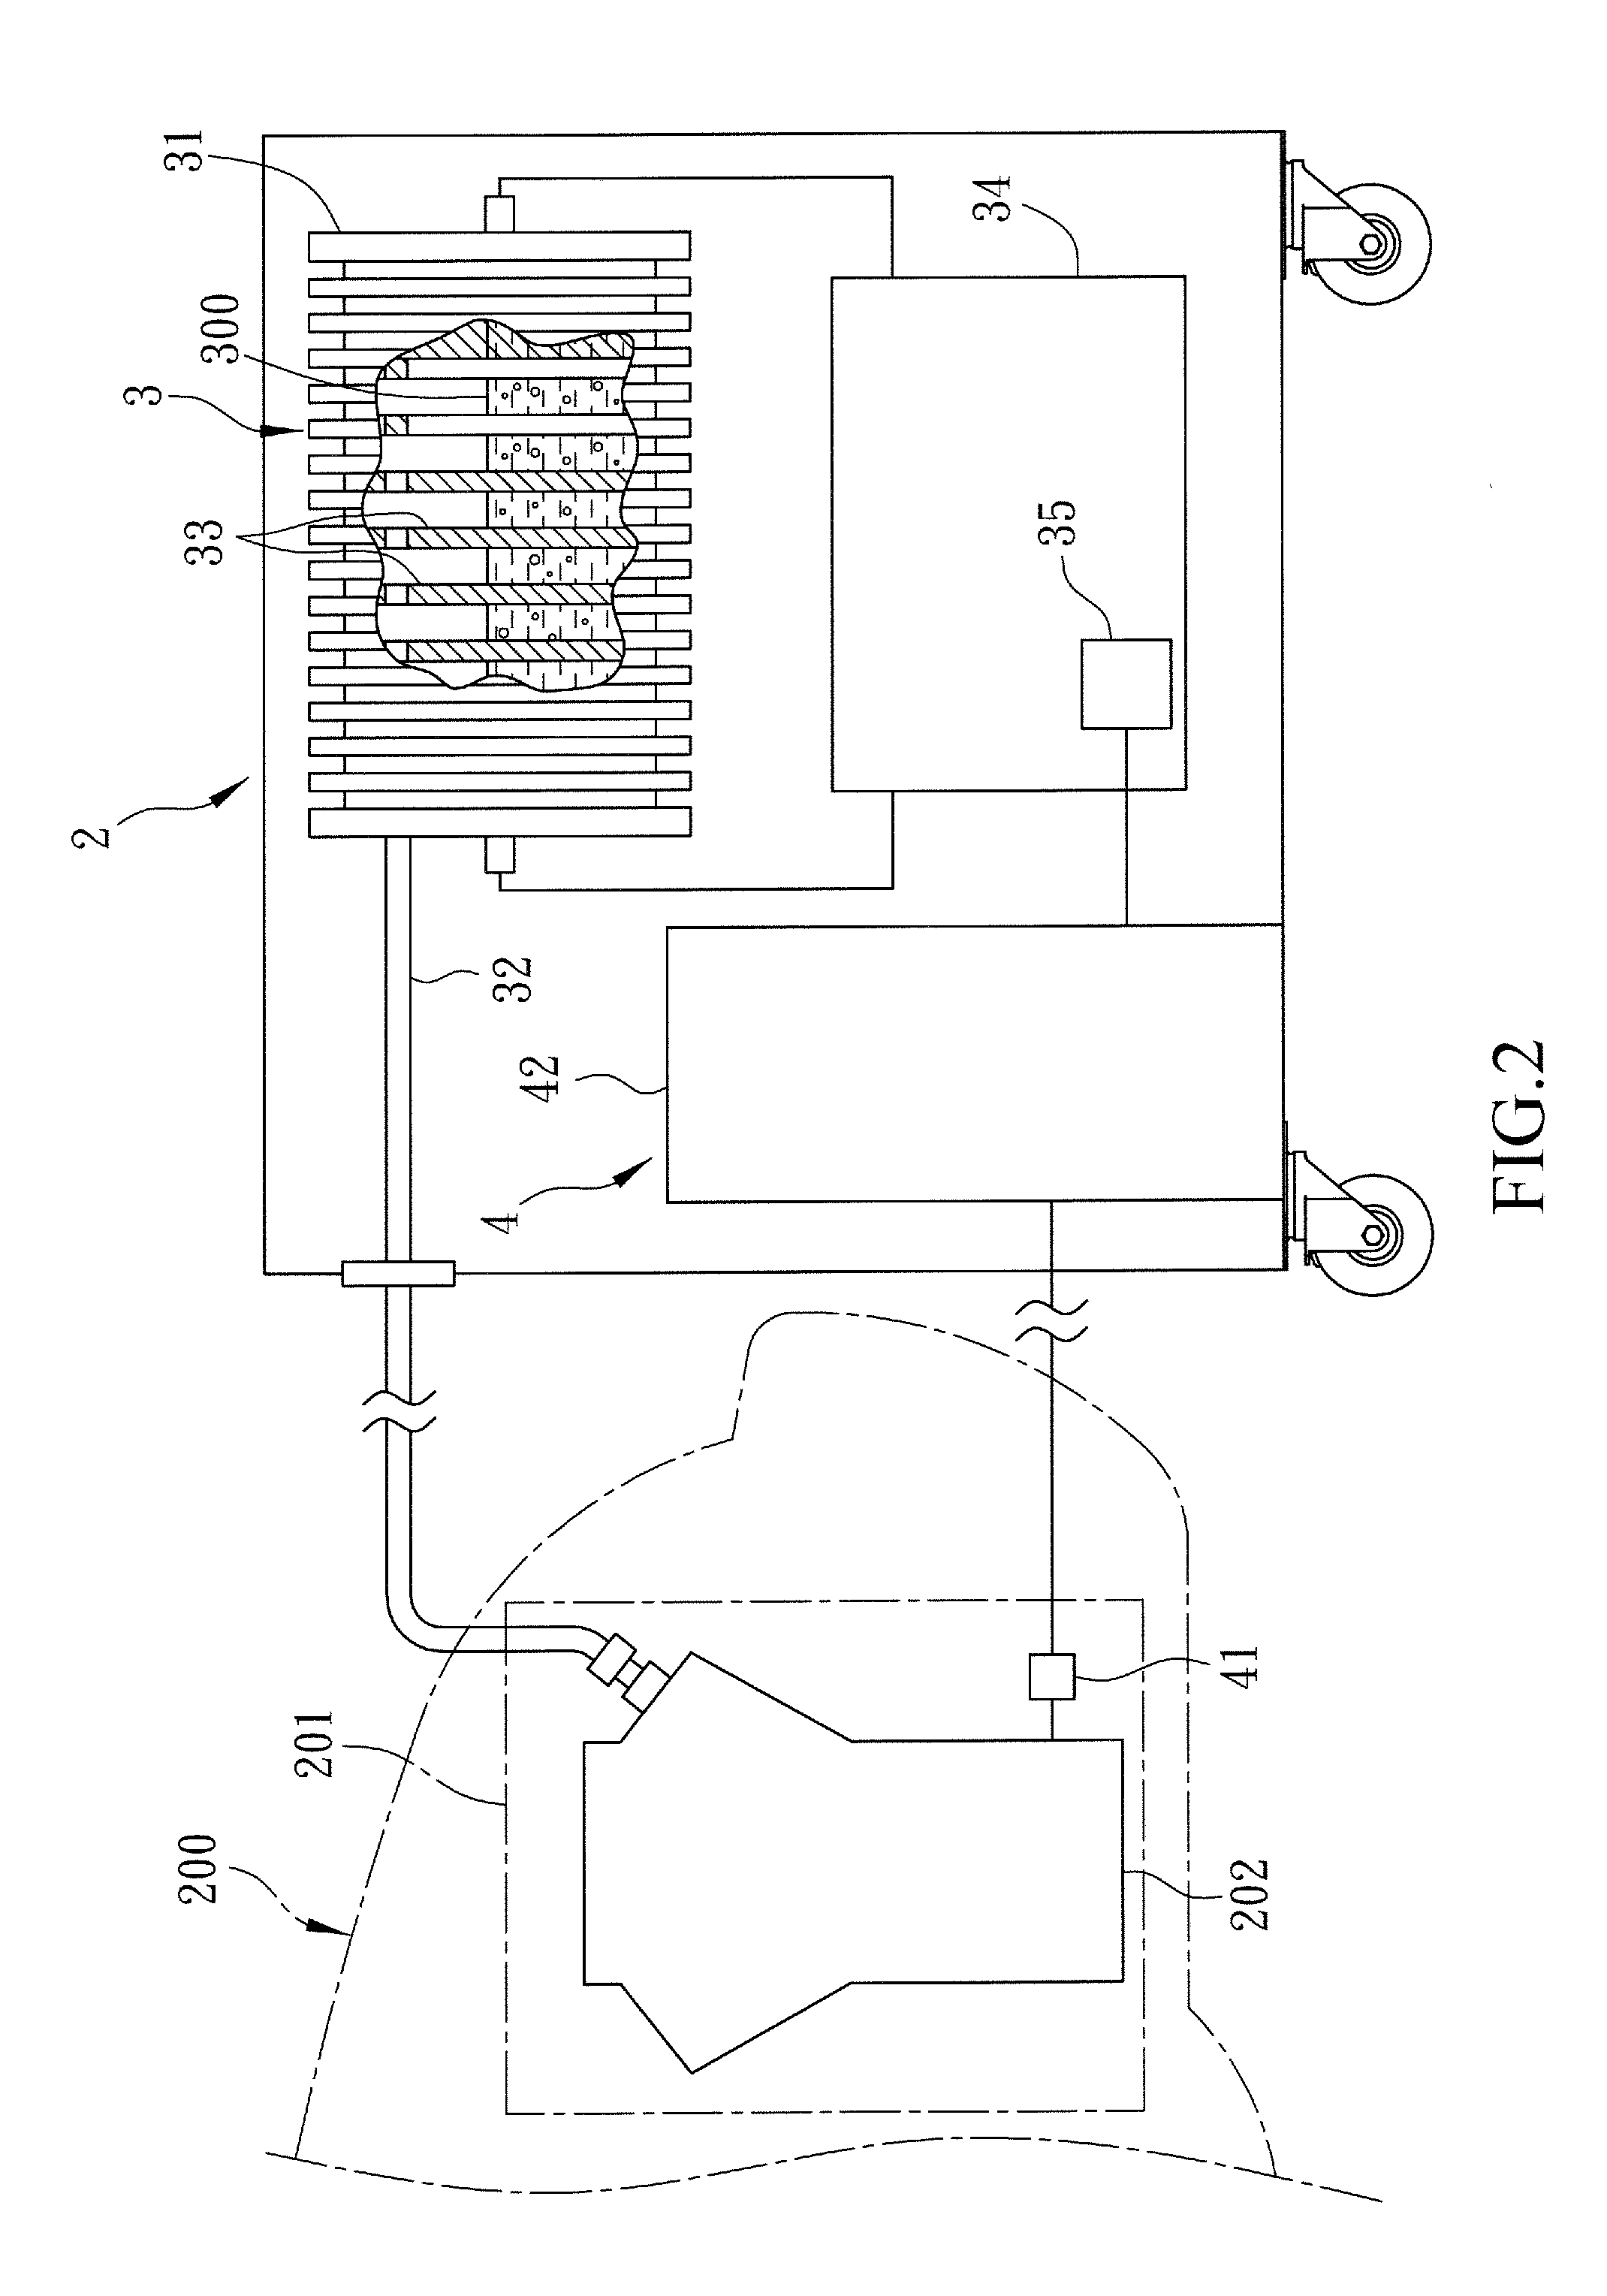 Carbon buildup removal device with protection function of vibration detection